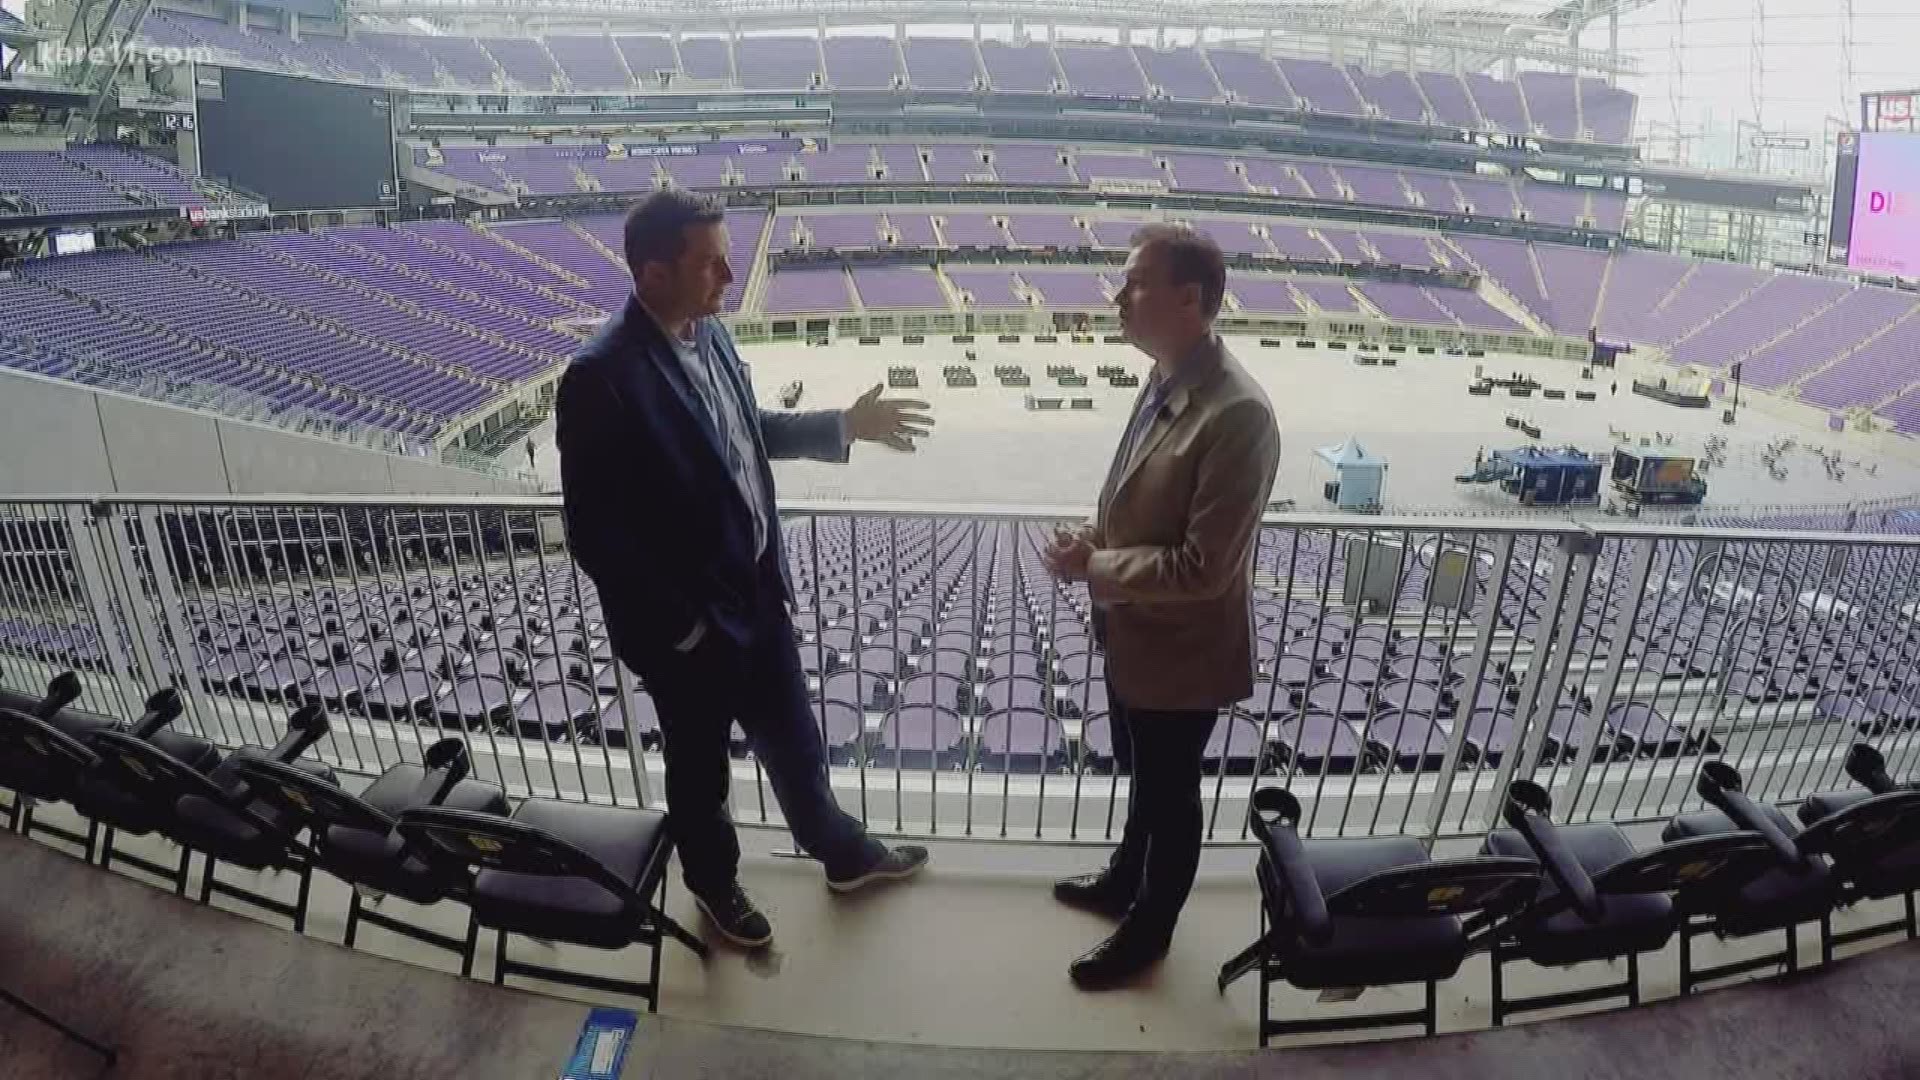 Fantasy sports leaders hold convention at U.S. Bank Stadium